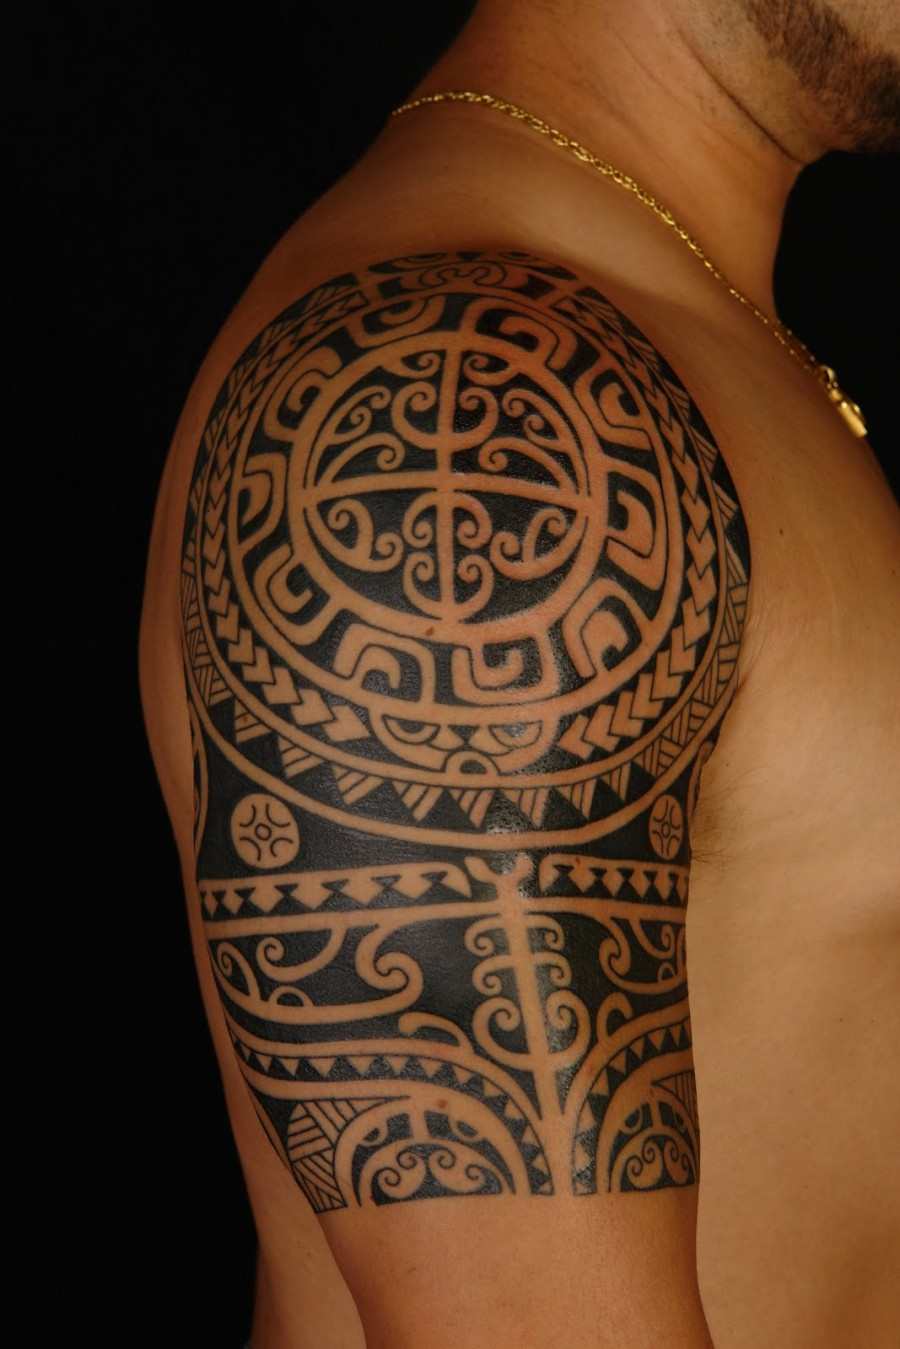 Awesome Polynesian Shoulder Sleeve Tattoo Design For Men And Women regarding dimensions 900 X 1349